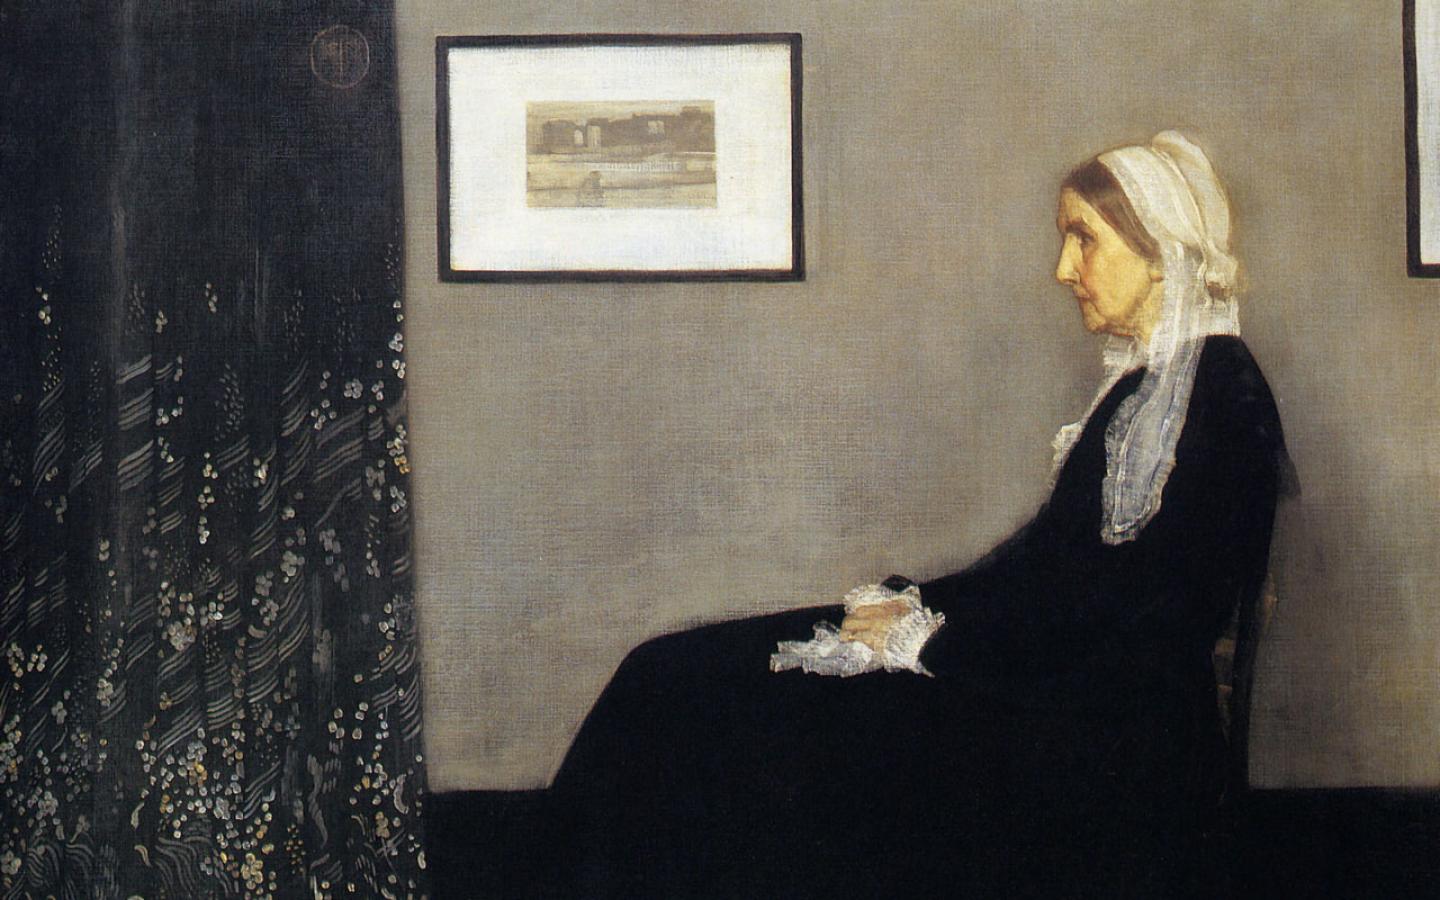 James McNeill Whistler - Arrangement in Grey and Black - The Artist's Mother (1871) Wallpaper #2 1440 x 900 